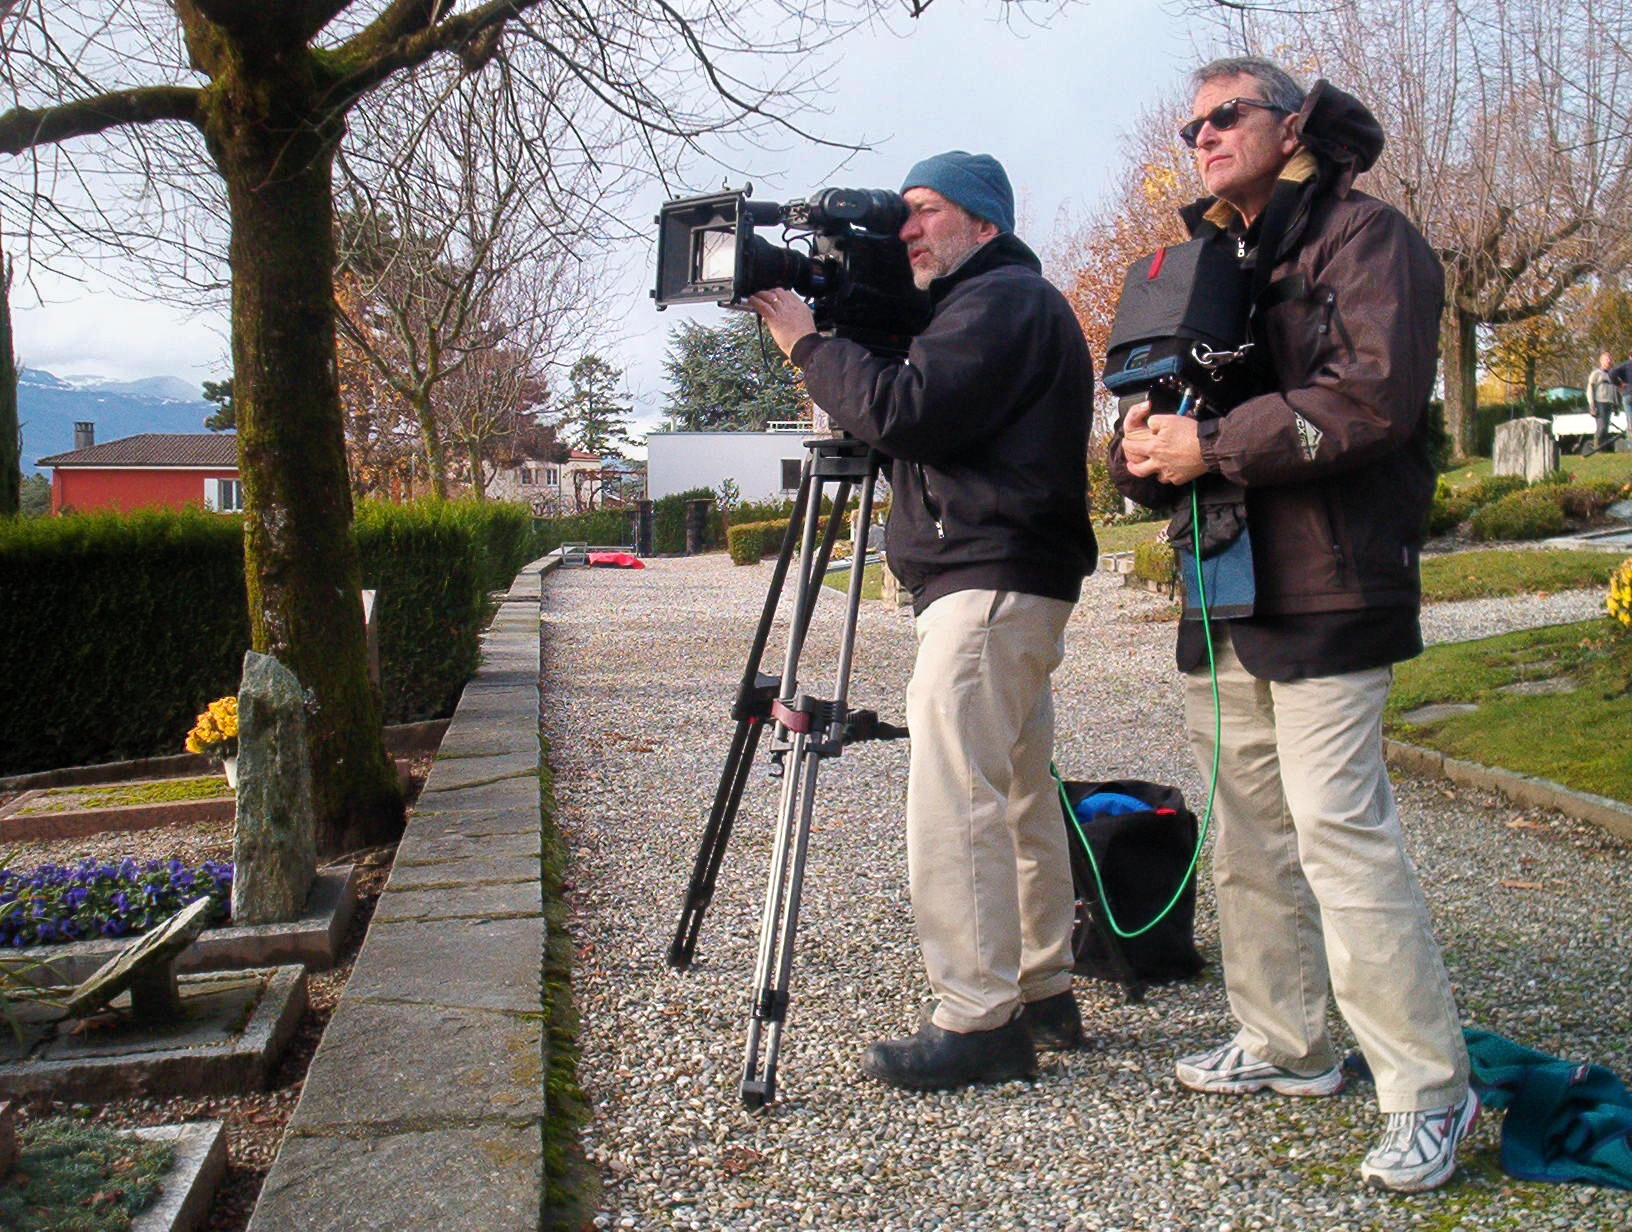 Allen Moore - Camera and Thomas O'Connor directing in Switzerland.